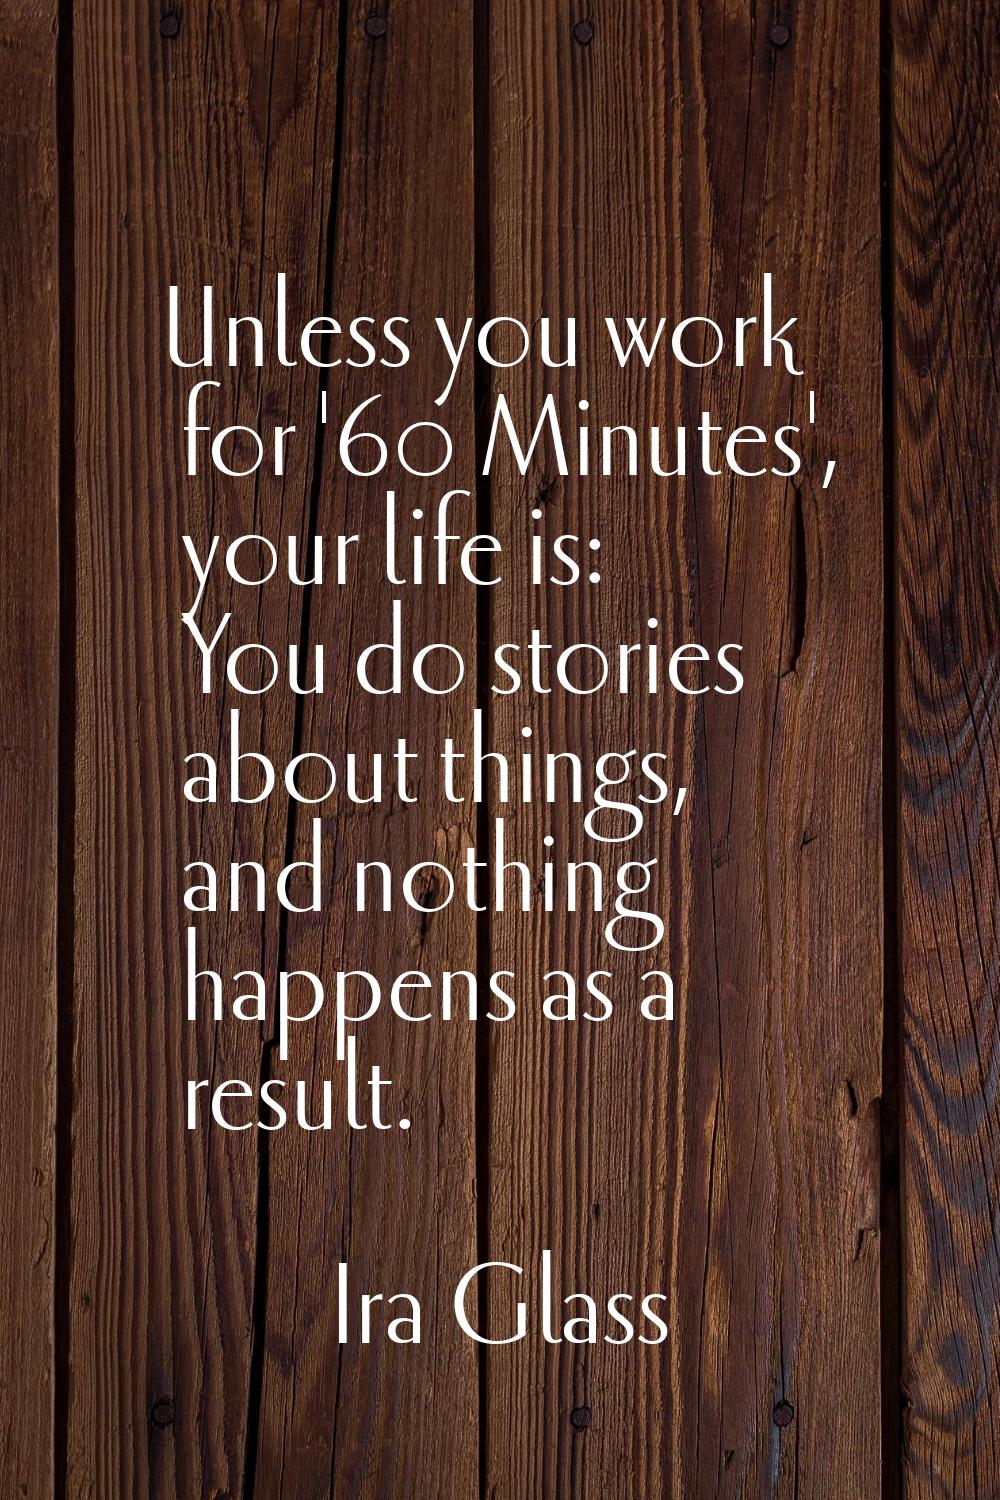 Unless you work for '60 Minutes', your life is: You do stories about things, and nothing happens as